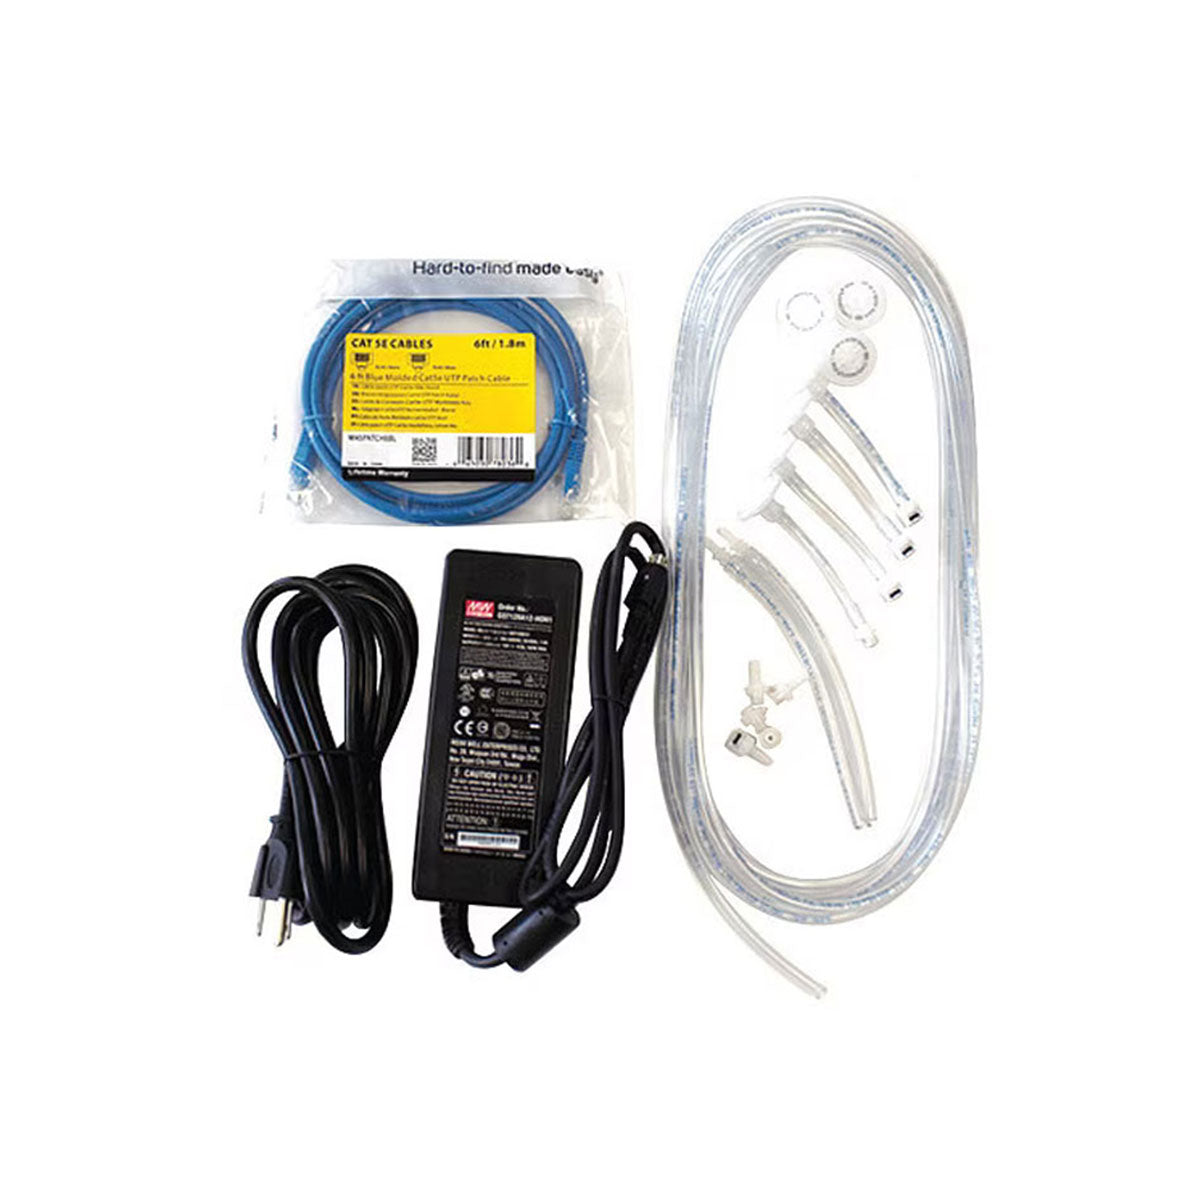 Intellidox Enabler Kit Na Version Includes Region Specific AC Power Cord Ethernet Cable Inlet Filter Assembly Calibration Gas Tubing Purge Gas Tubing Exhaust Tubing Quick Connect Fittings & IntelliDox Inlet End Plate